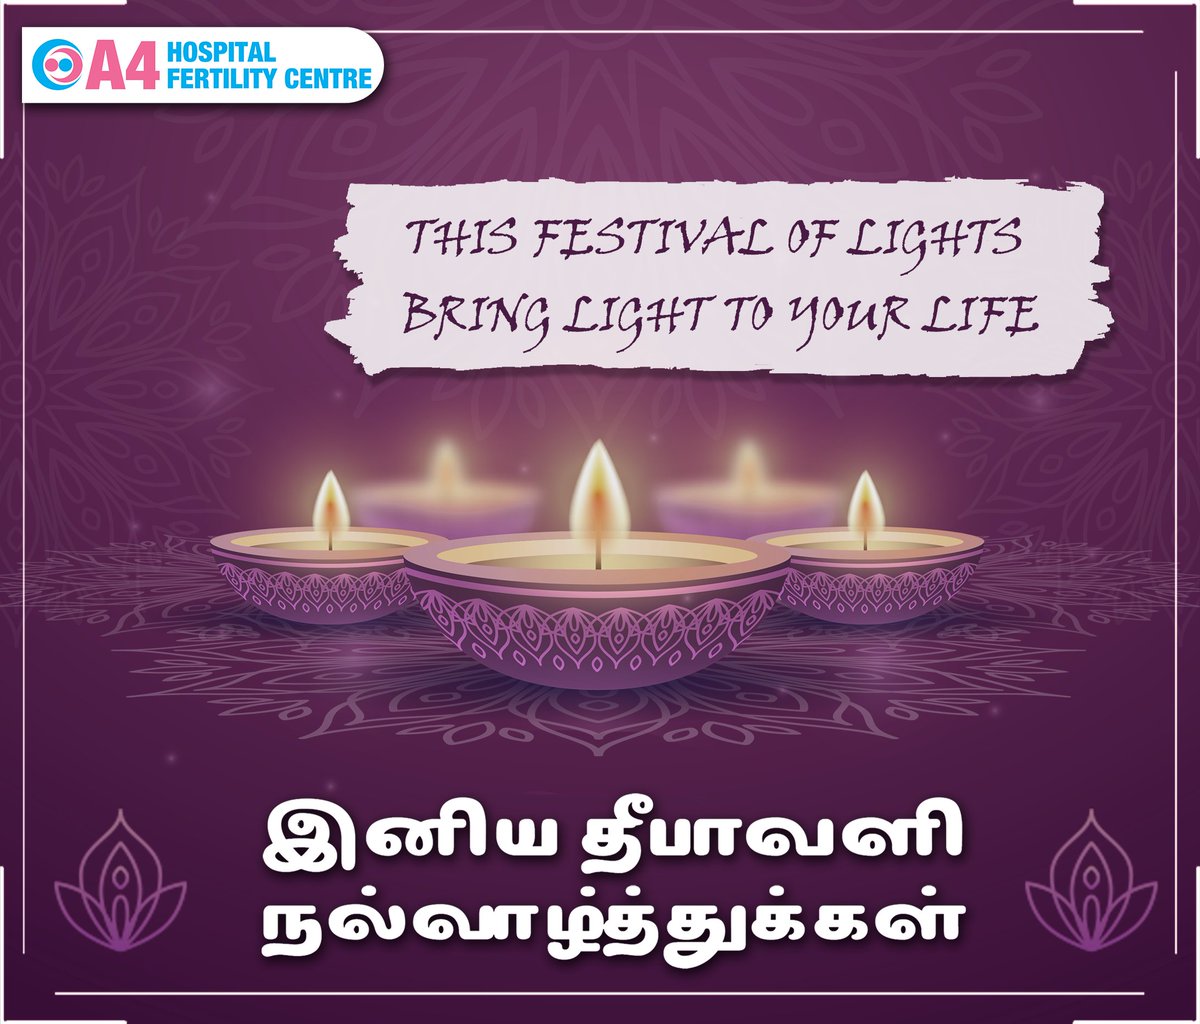 #a4hospitalandfertilitycentre  wishes you all very '𝑯𝒂𝒑𝒑𝒚 𝑫𝒊𝒘𝒂𝒍𝒊', This festival of lights brings light to your life. #spreadloveandhappiness 

#happydiwali🎉 #happydiwali #diwali2020🔥 #diwali #celebrationsoflights💥🎆✨ #a4fertilitycentre #a4hospital #chennai